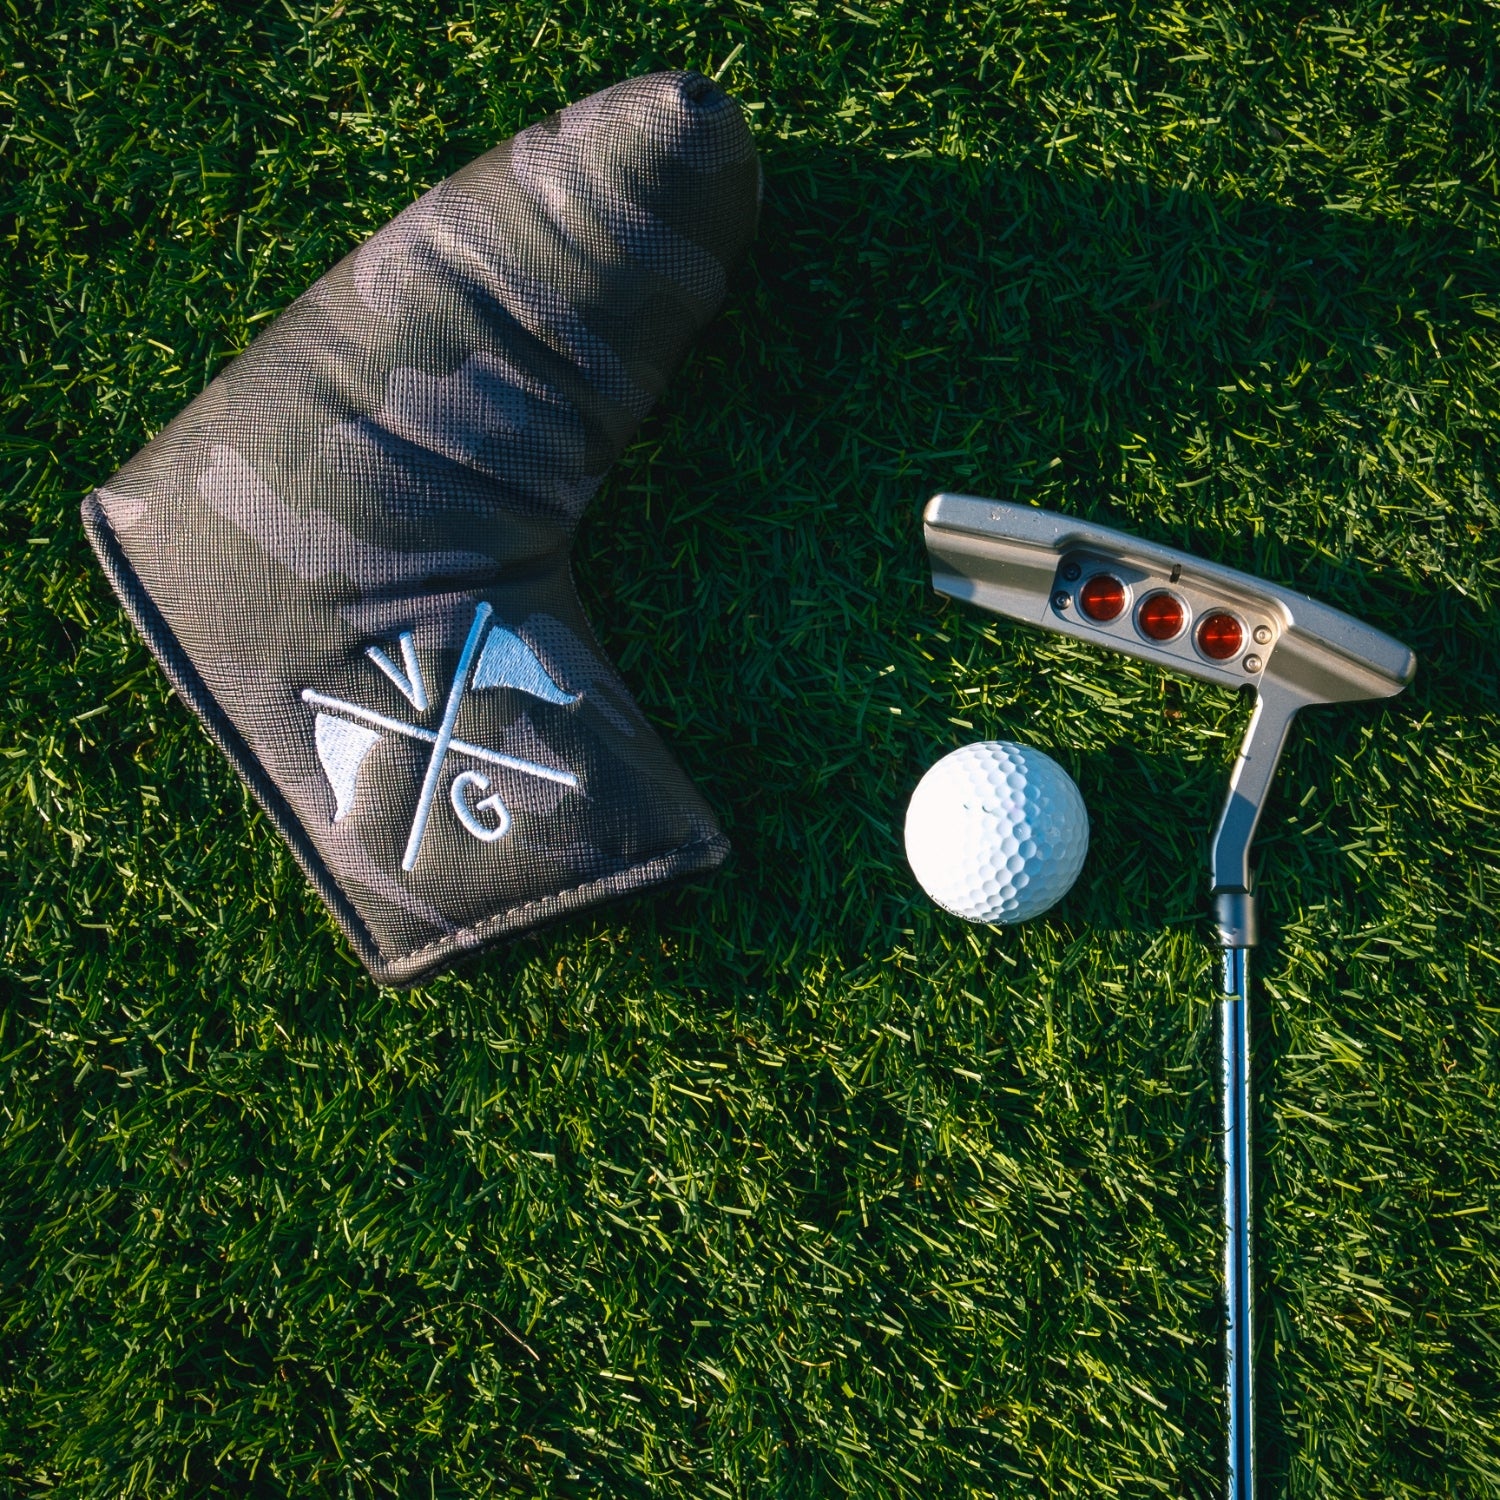 Violent Gentlemen Hockey Clothing Company new Golf collection. With more and more teams hitting the links, it’s time to continue our quest of taking over the golf course as well… Learn more about our May 1, 2023 new Violent Gentlemen Country Club golf releases.